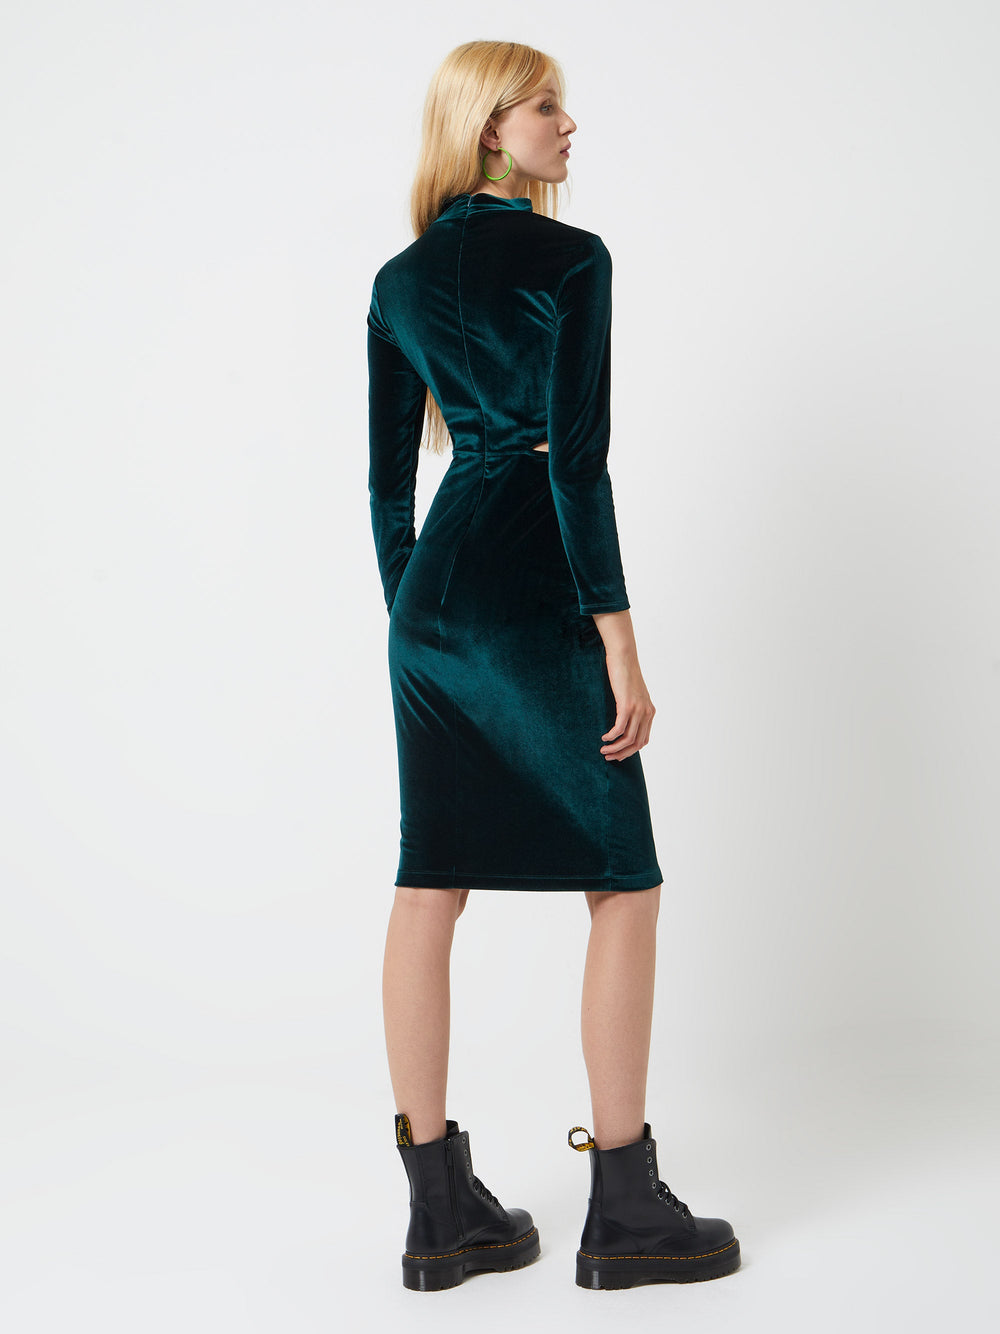 French Sula Dress Velvet | EU Out Cut Connection Jersey